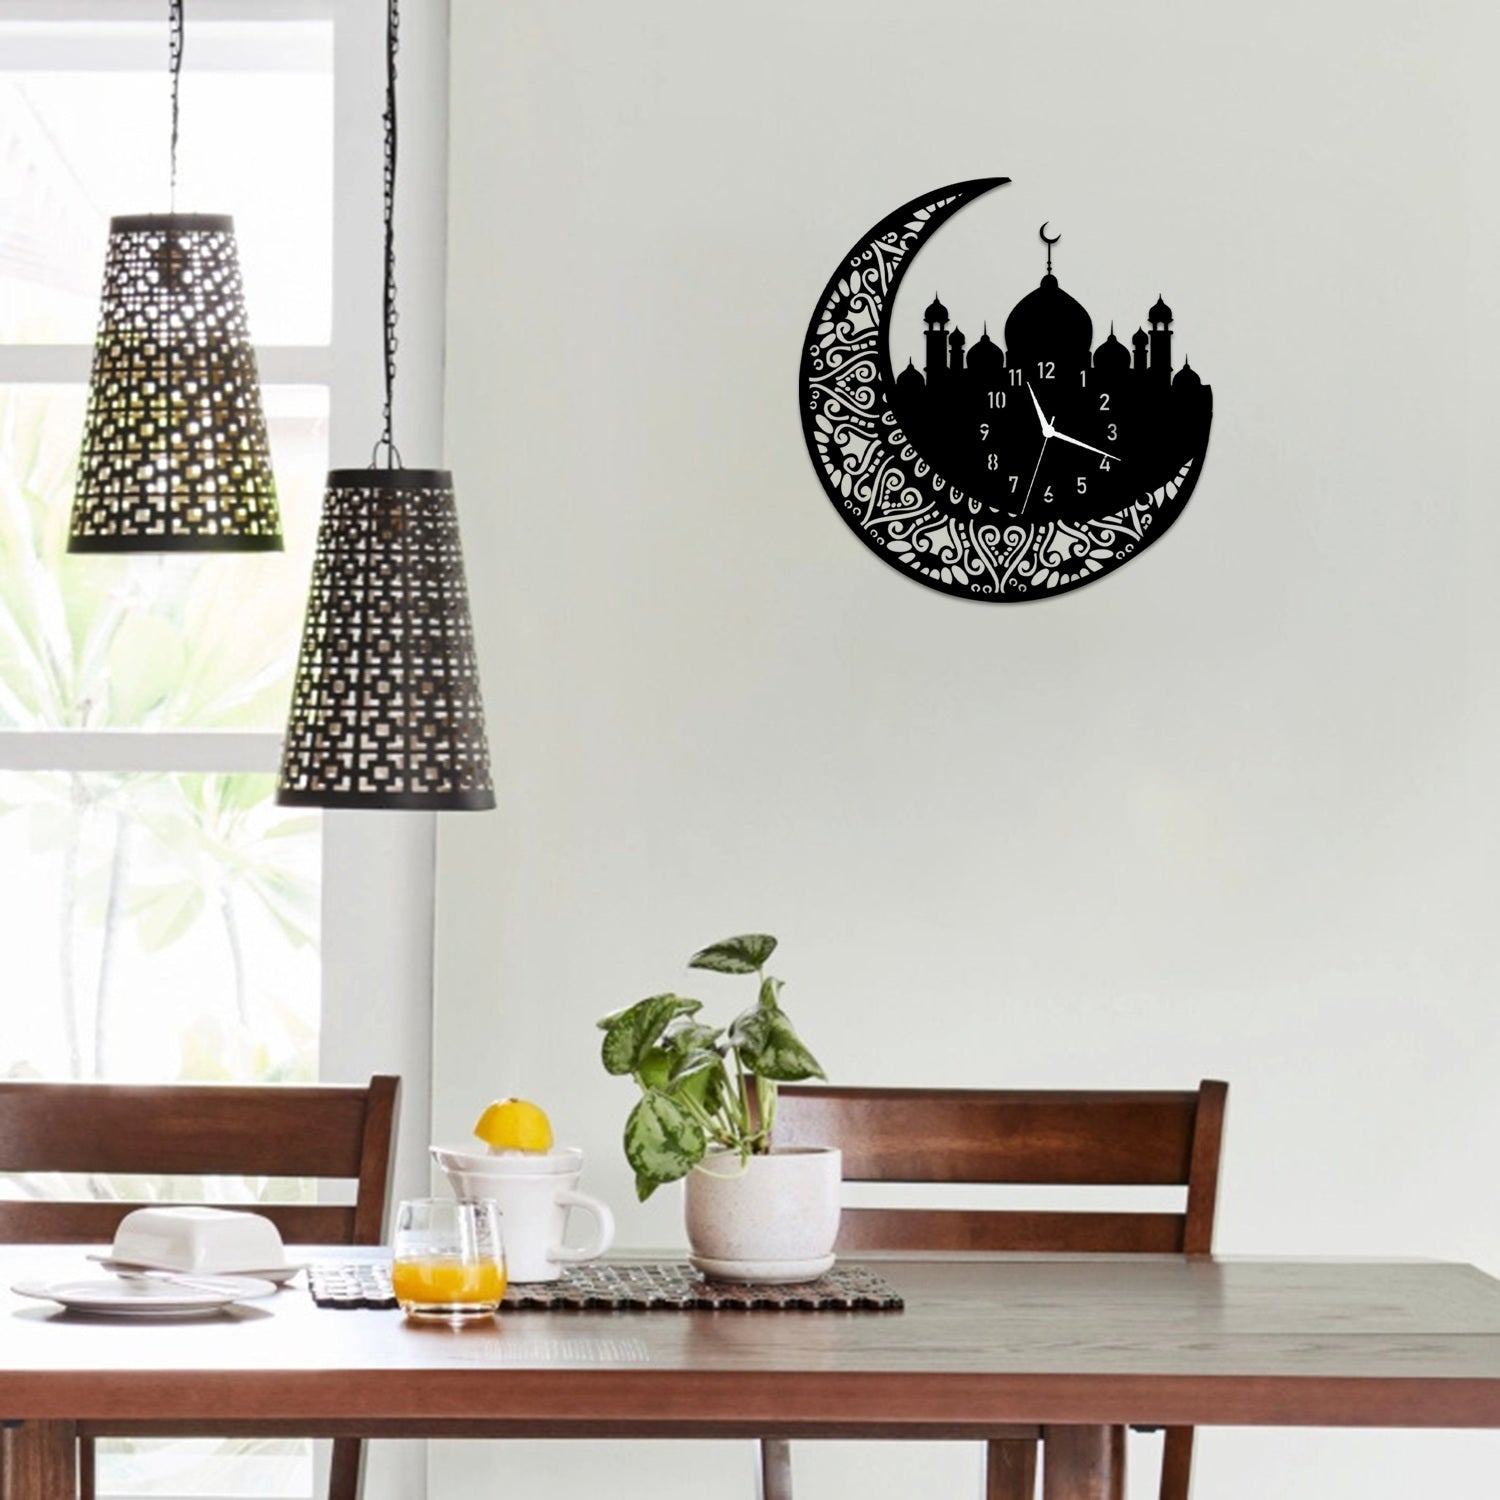 Chand with Mosque Design Wall Clock (1510066)